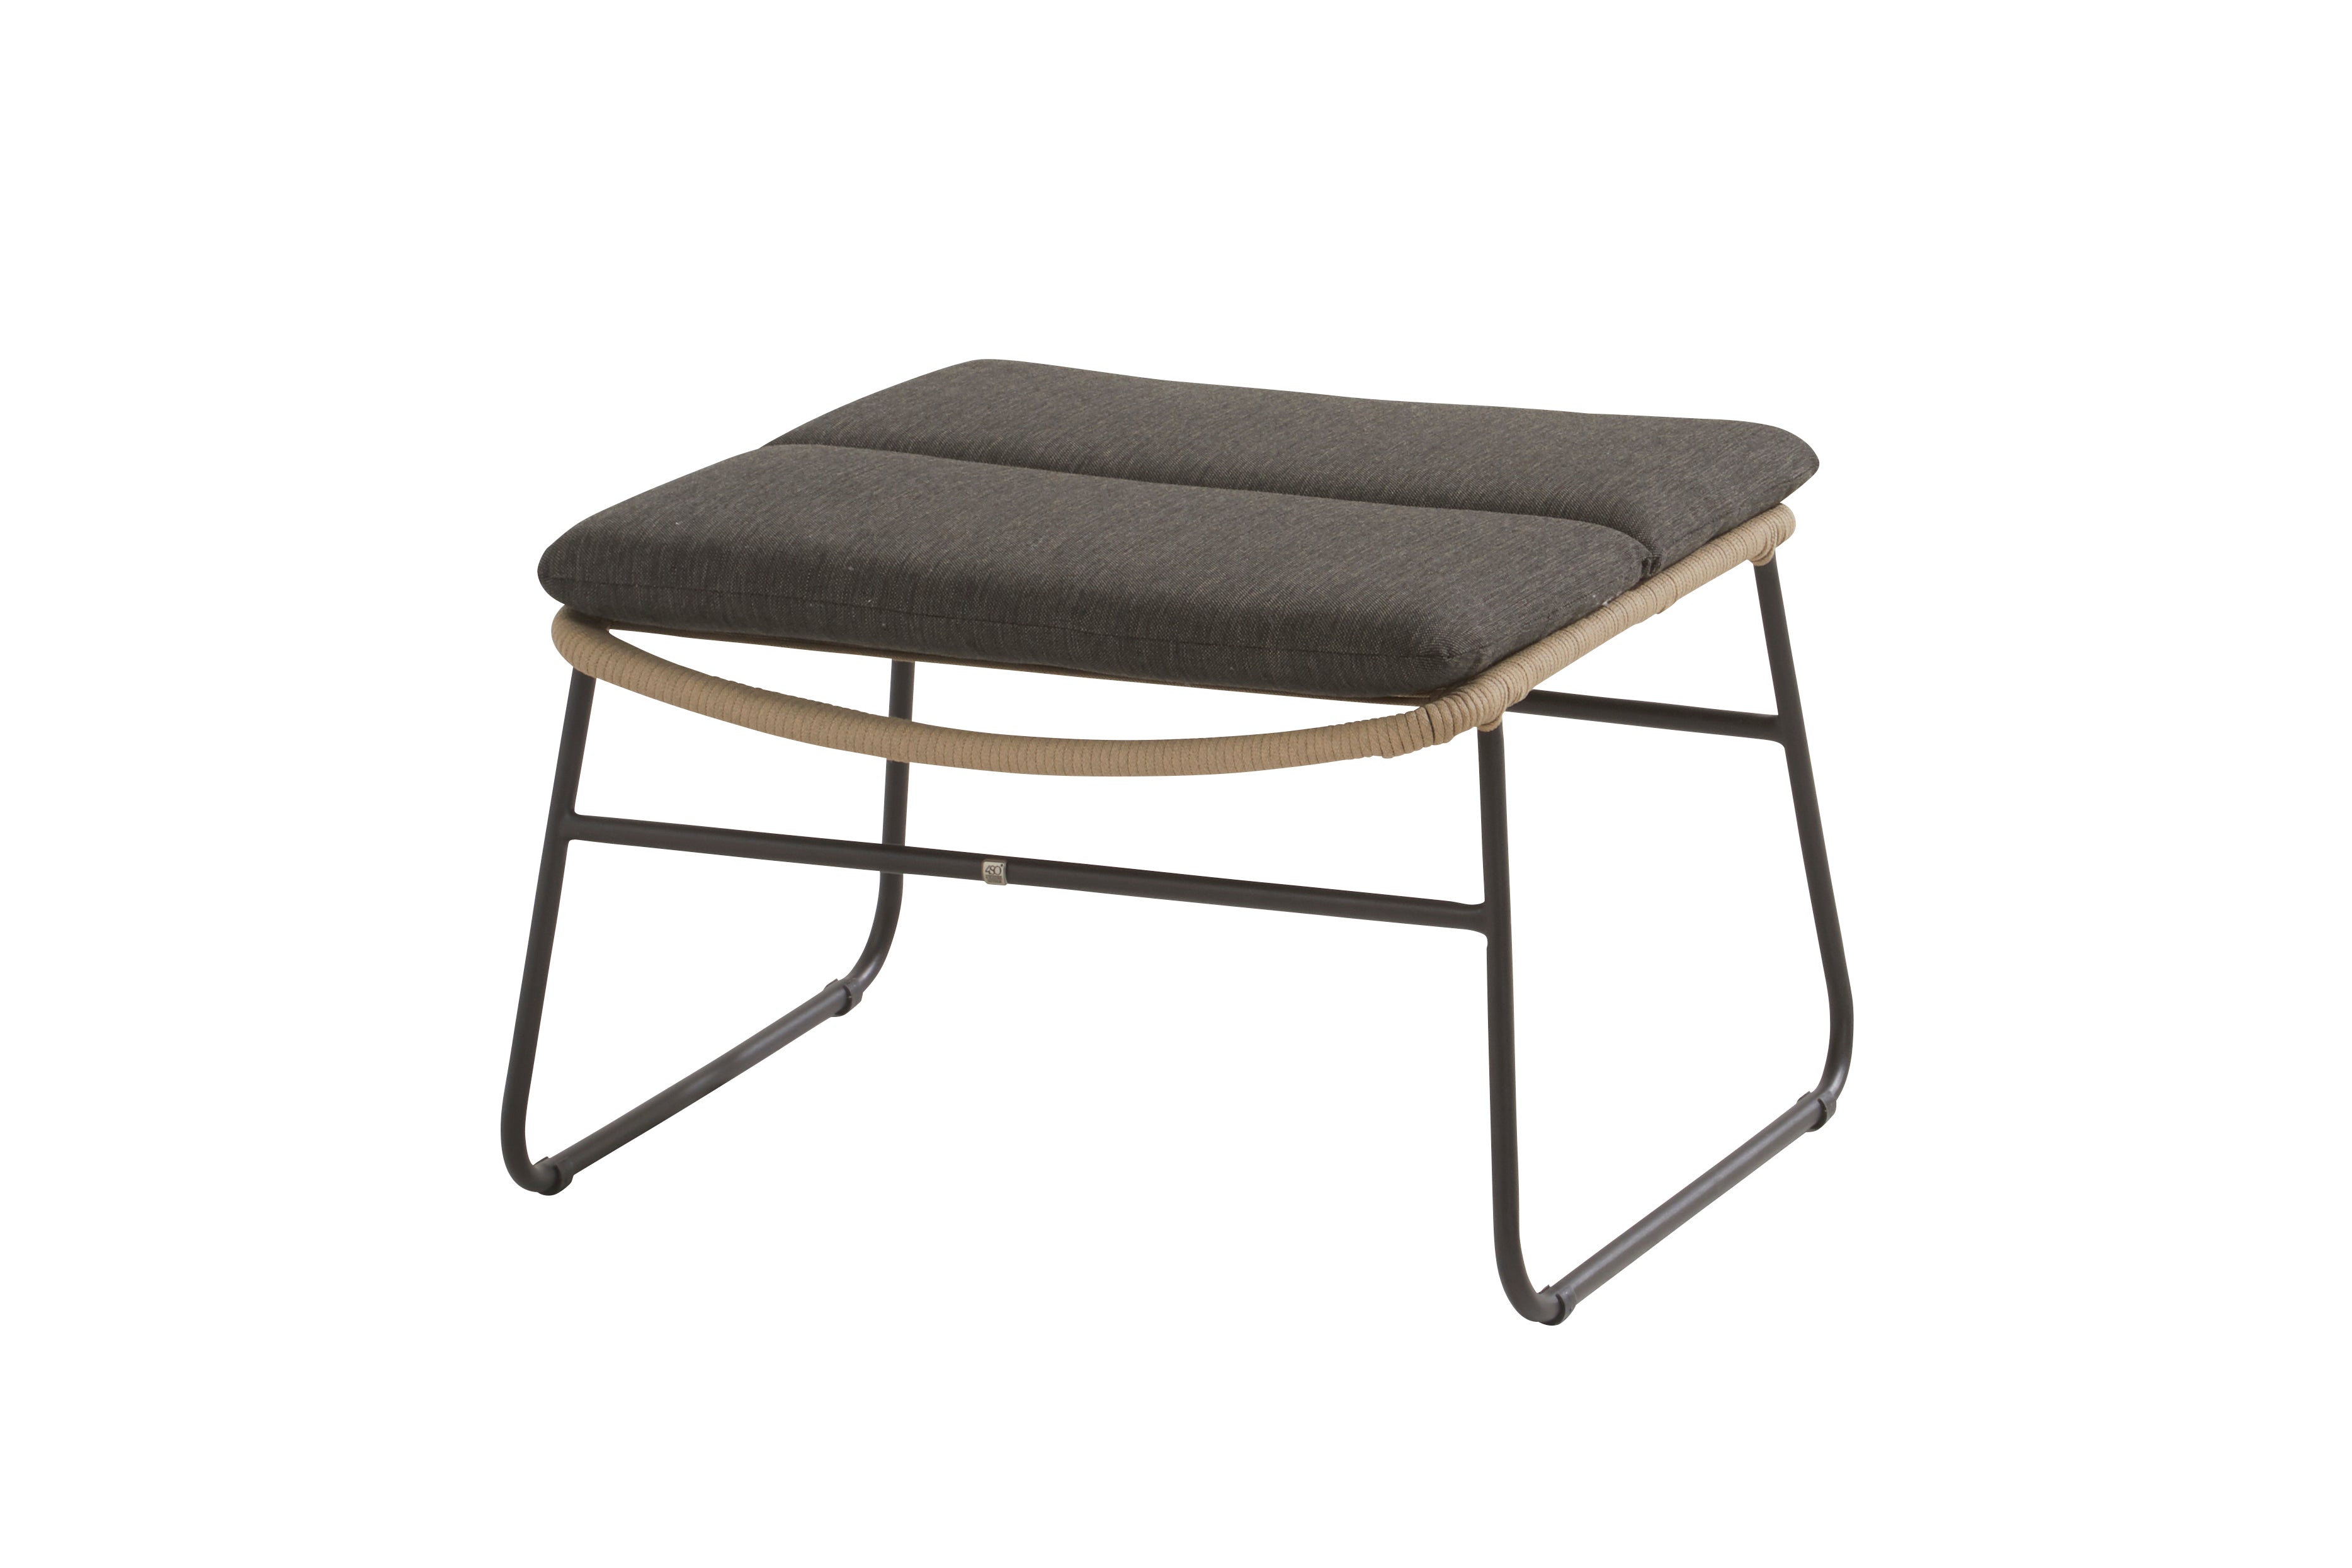 4 Seasons Outdoor Scandic Footstool With Cushion